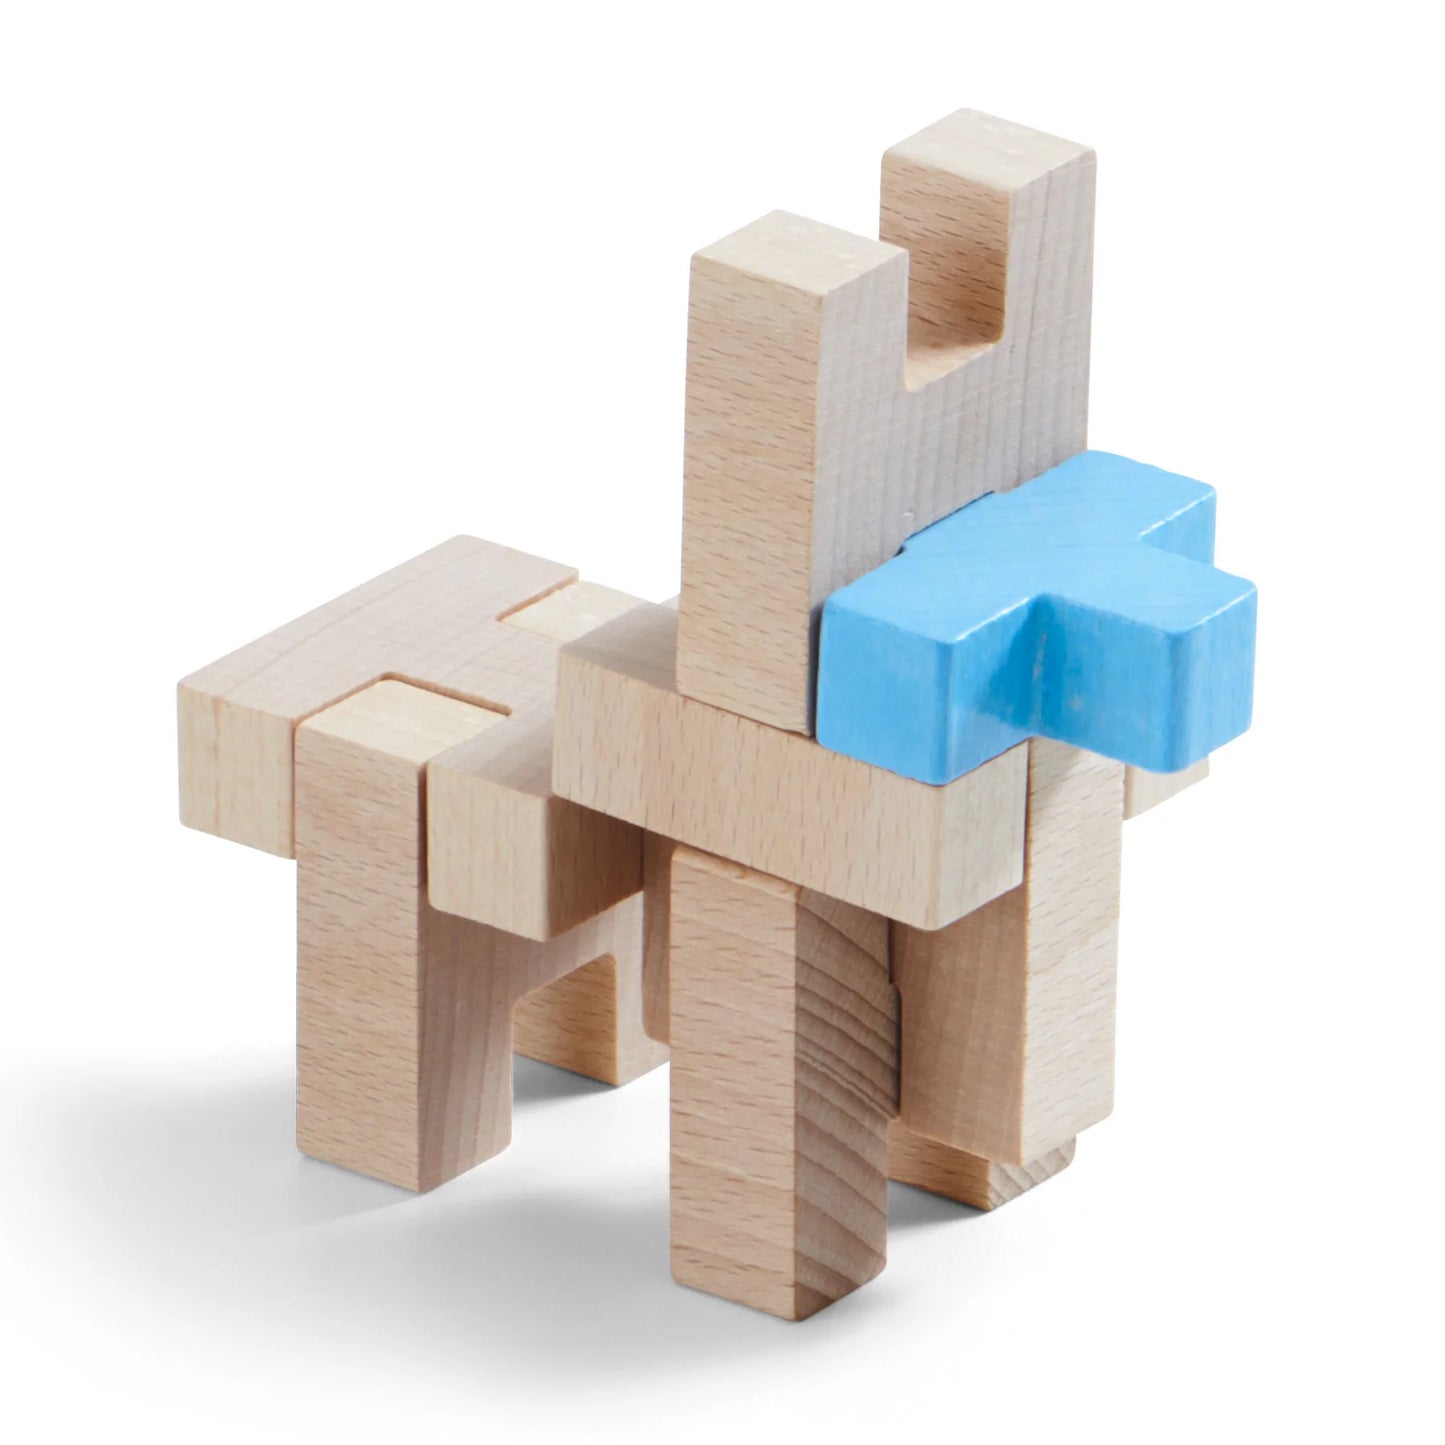 HABA 3D Aerius Wooden Stacking Game